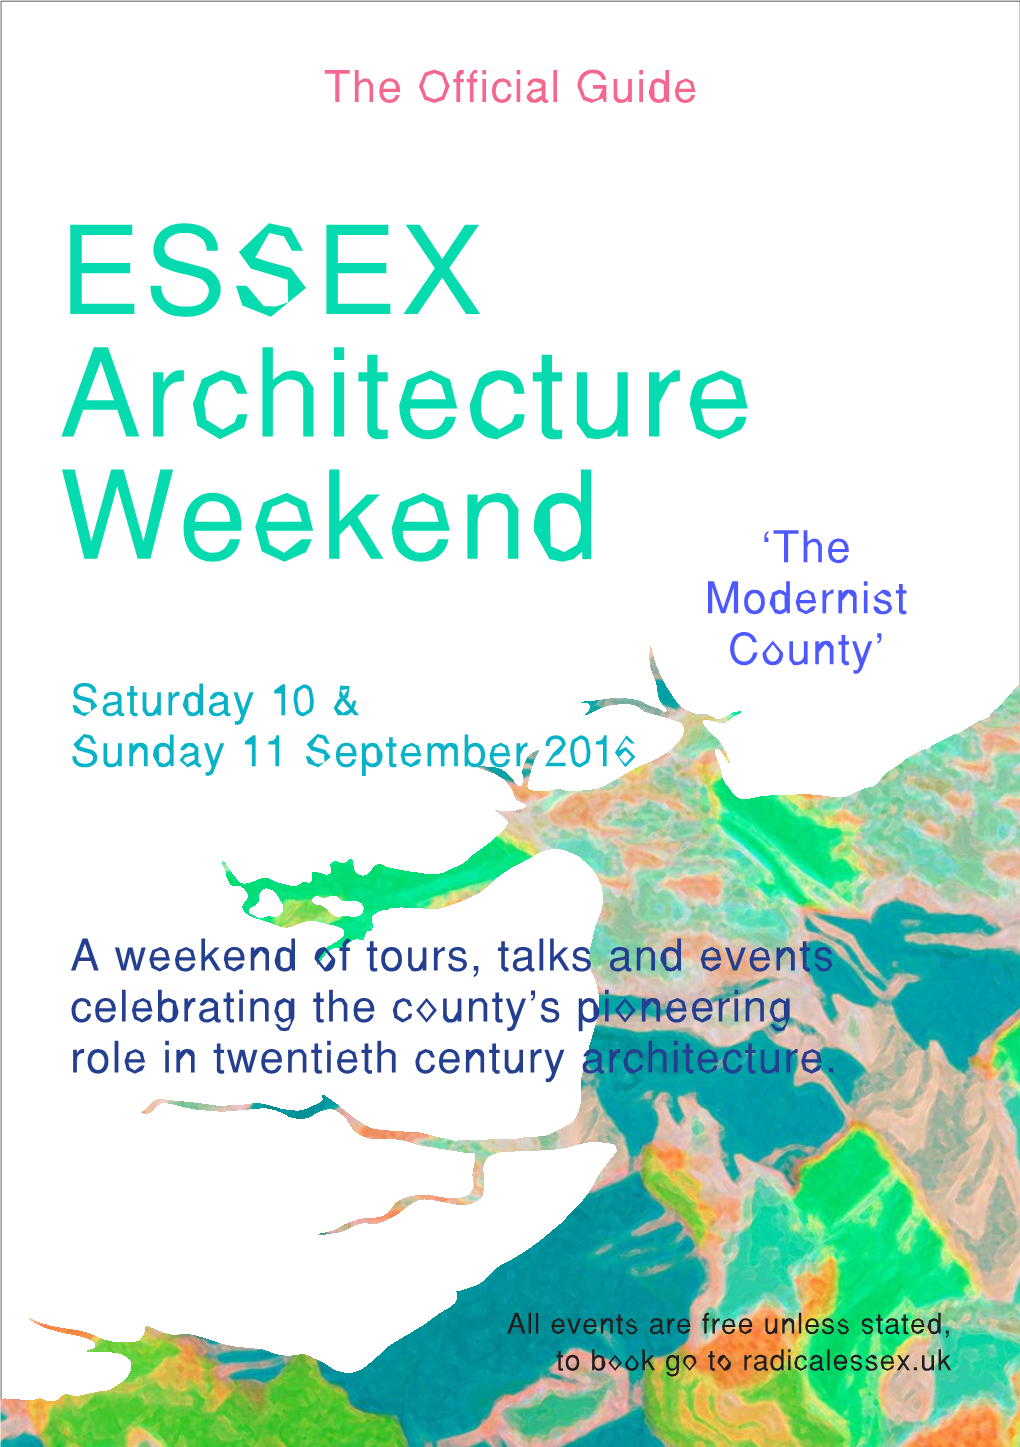 ESSEX Architecture Weekend 'The